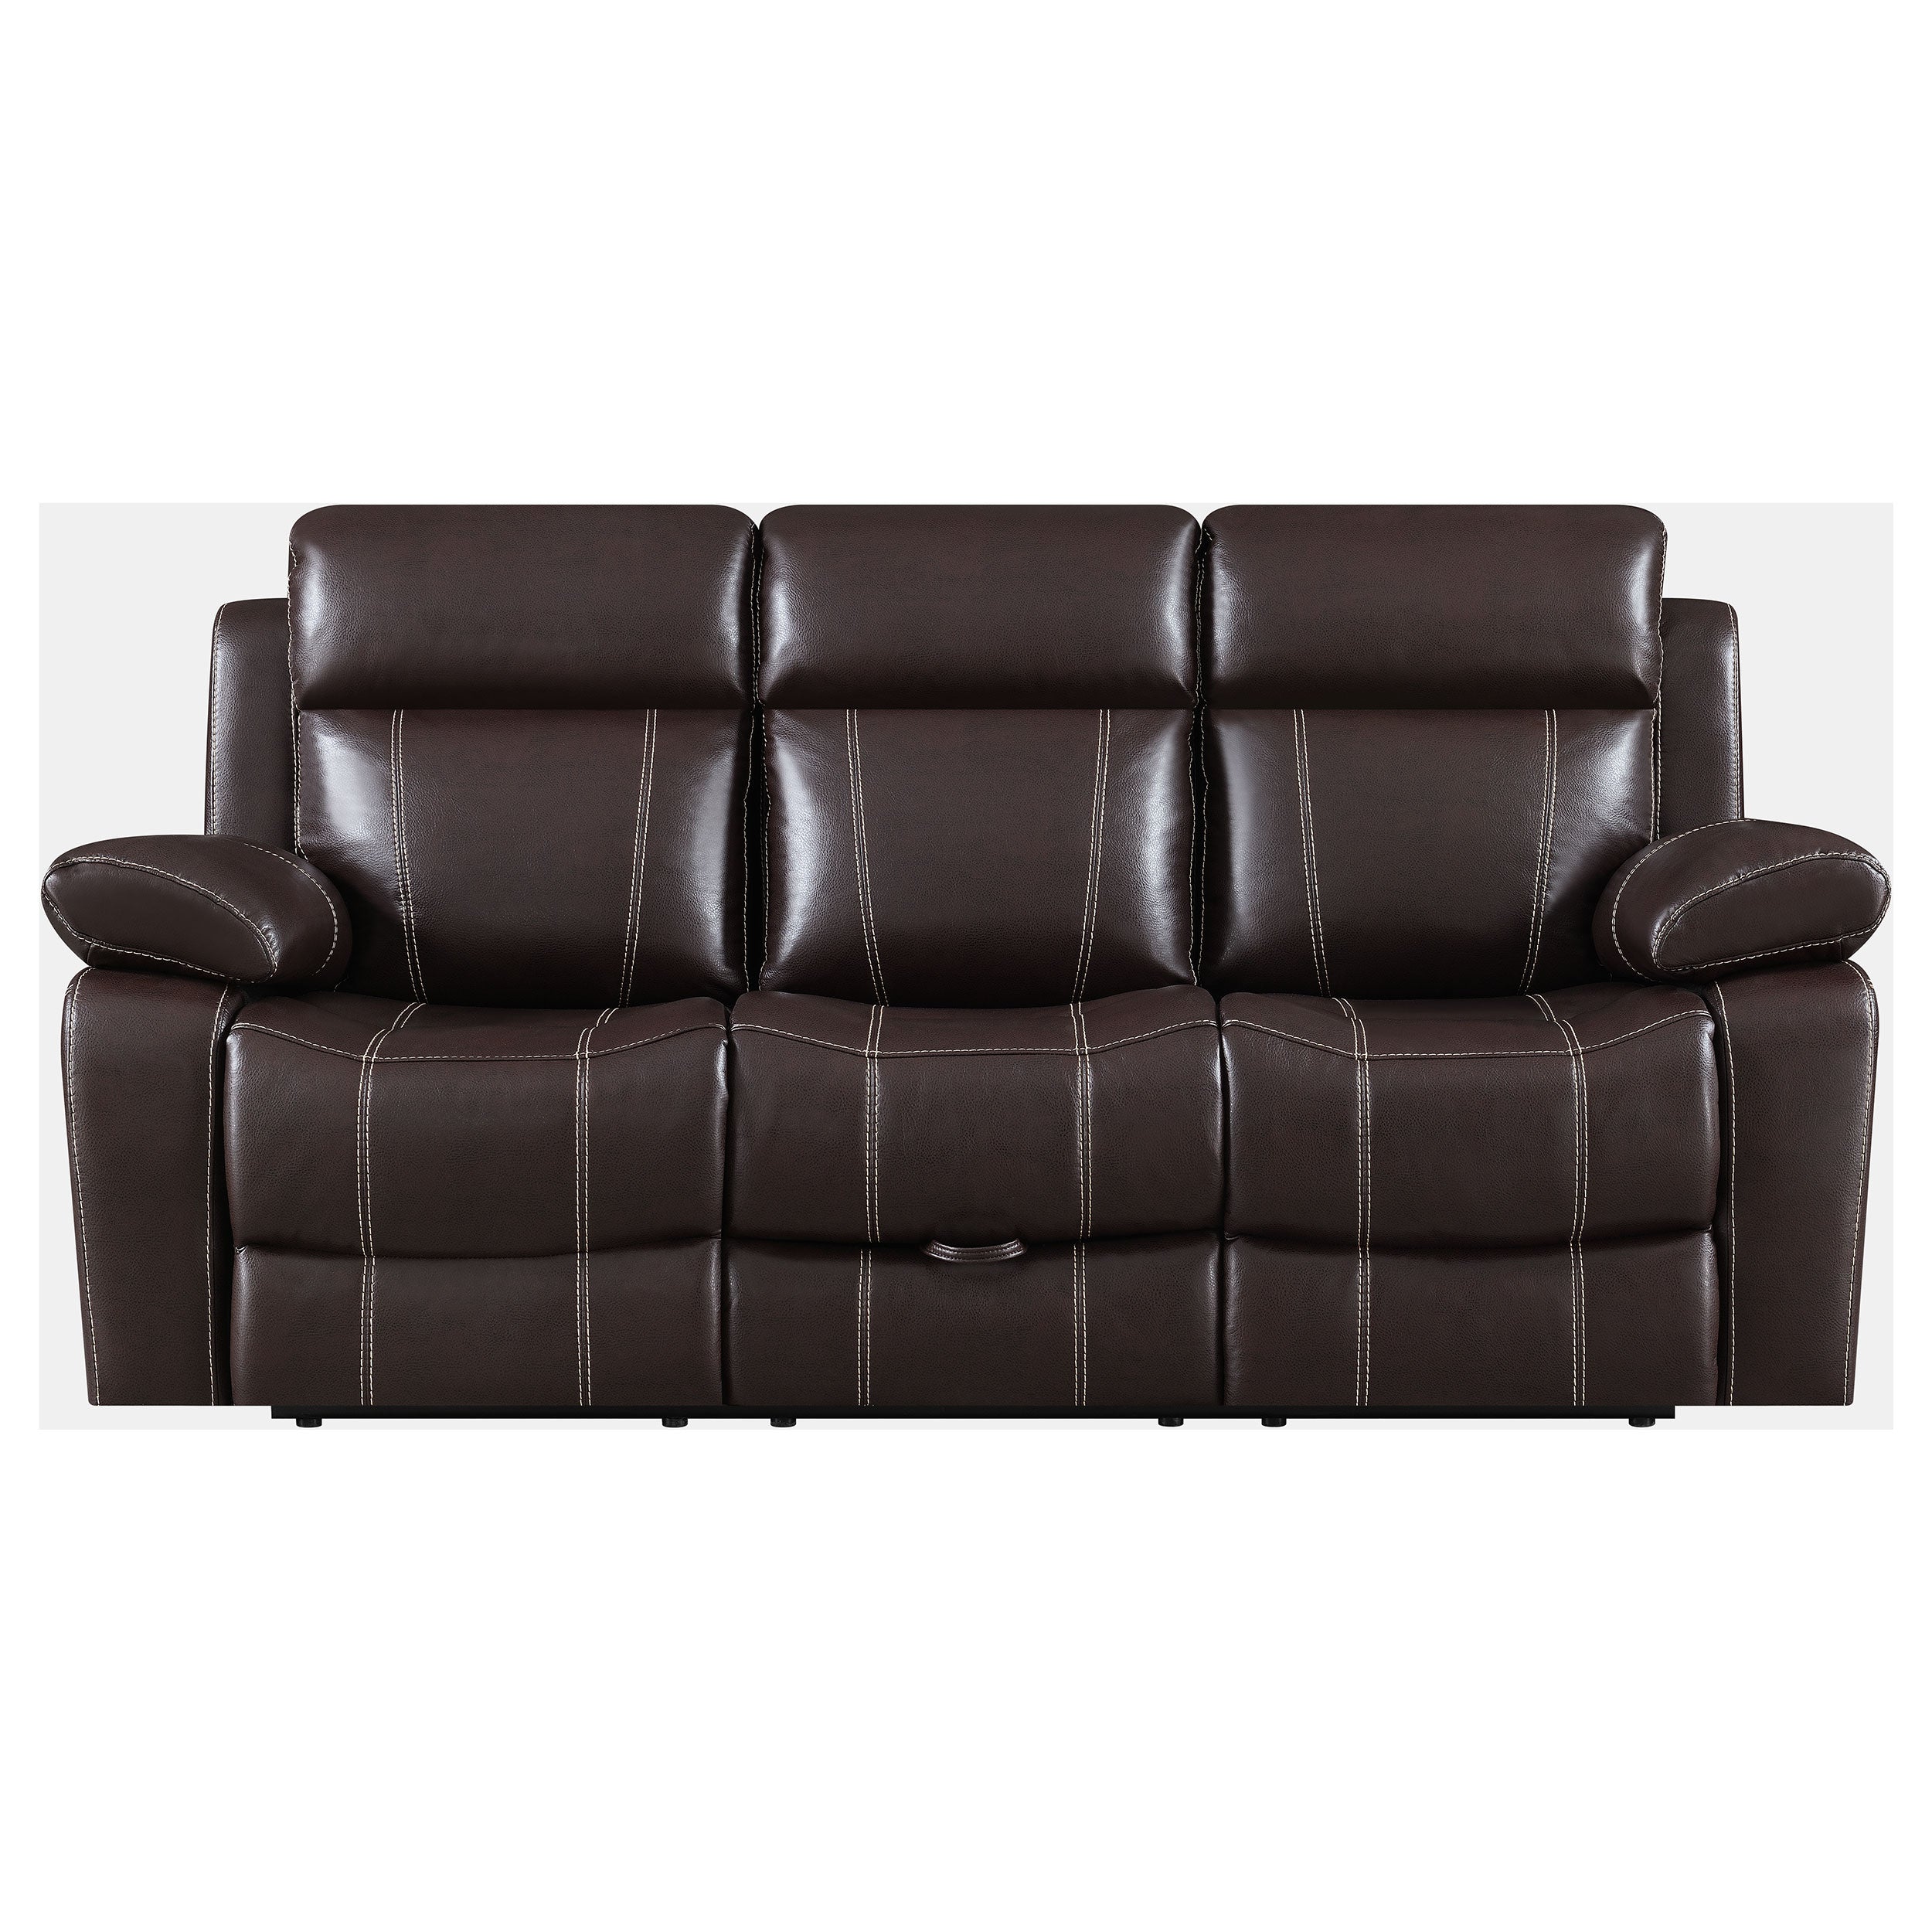 Coaster Myleene Motion Sofa with Drop-down Table Chestnut Default Title